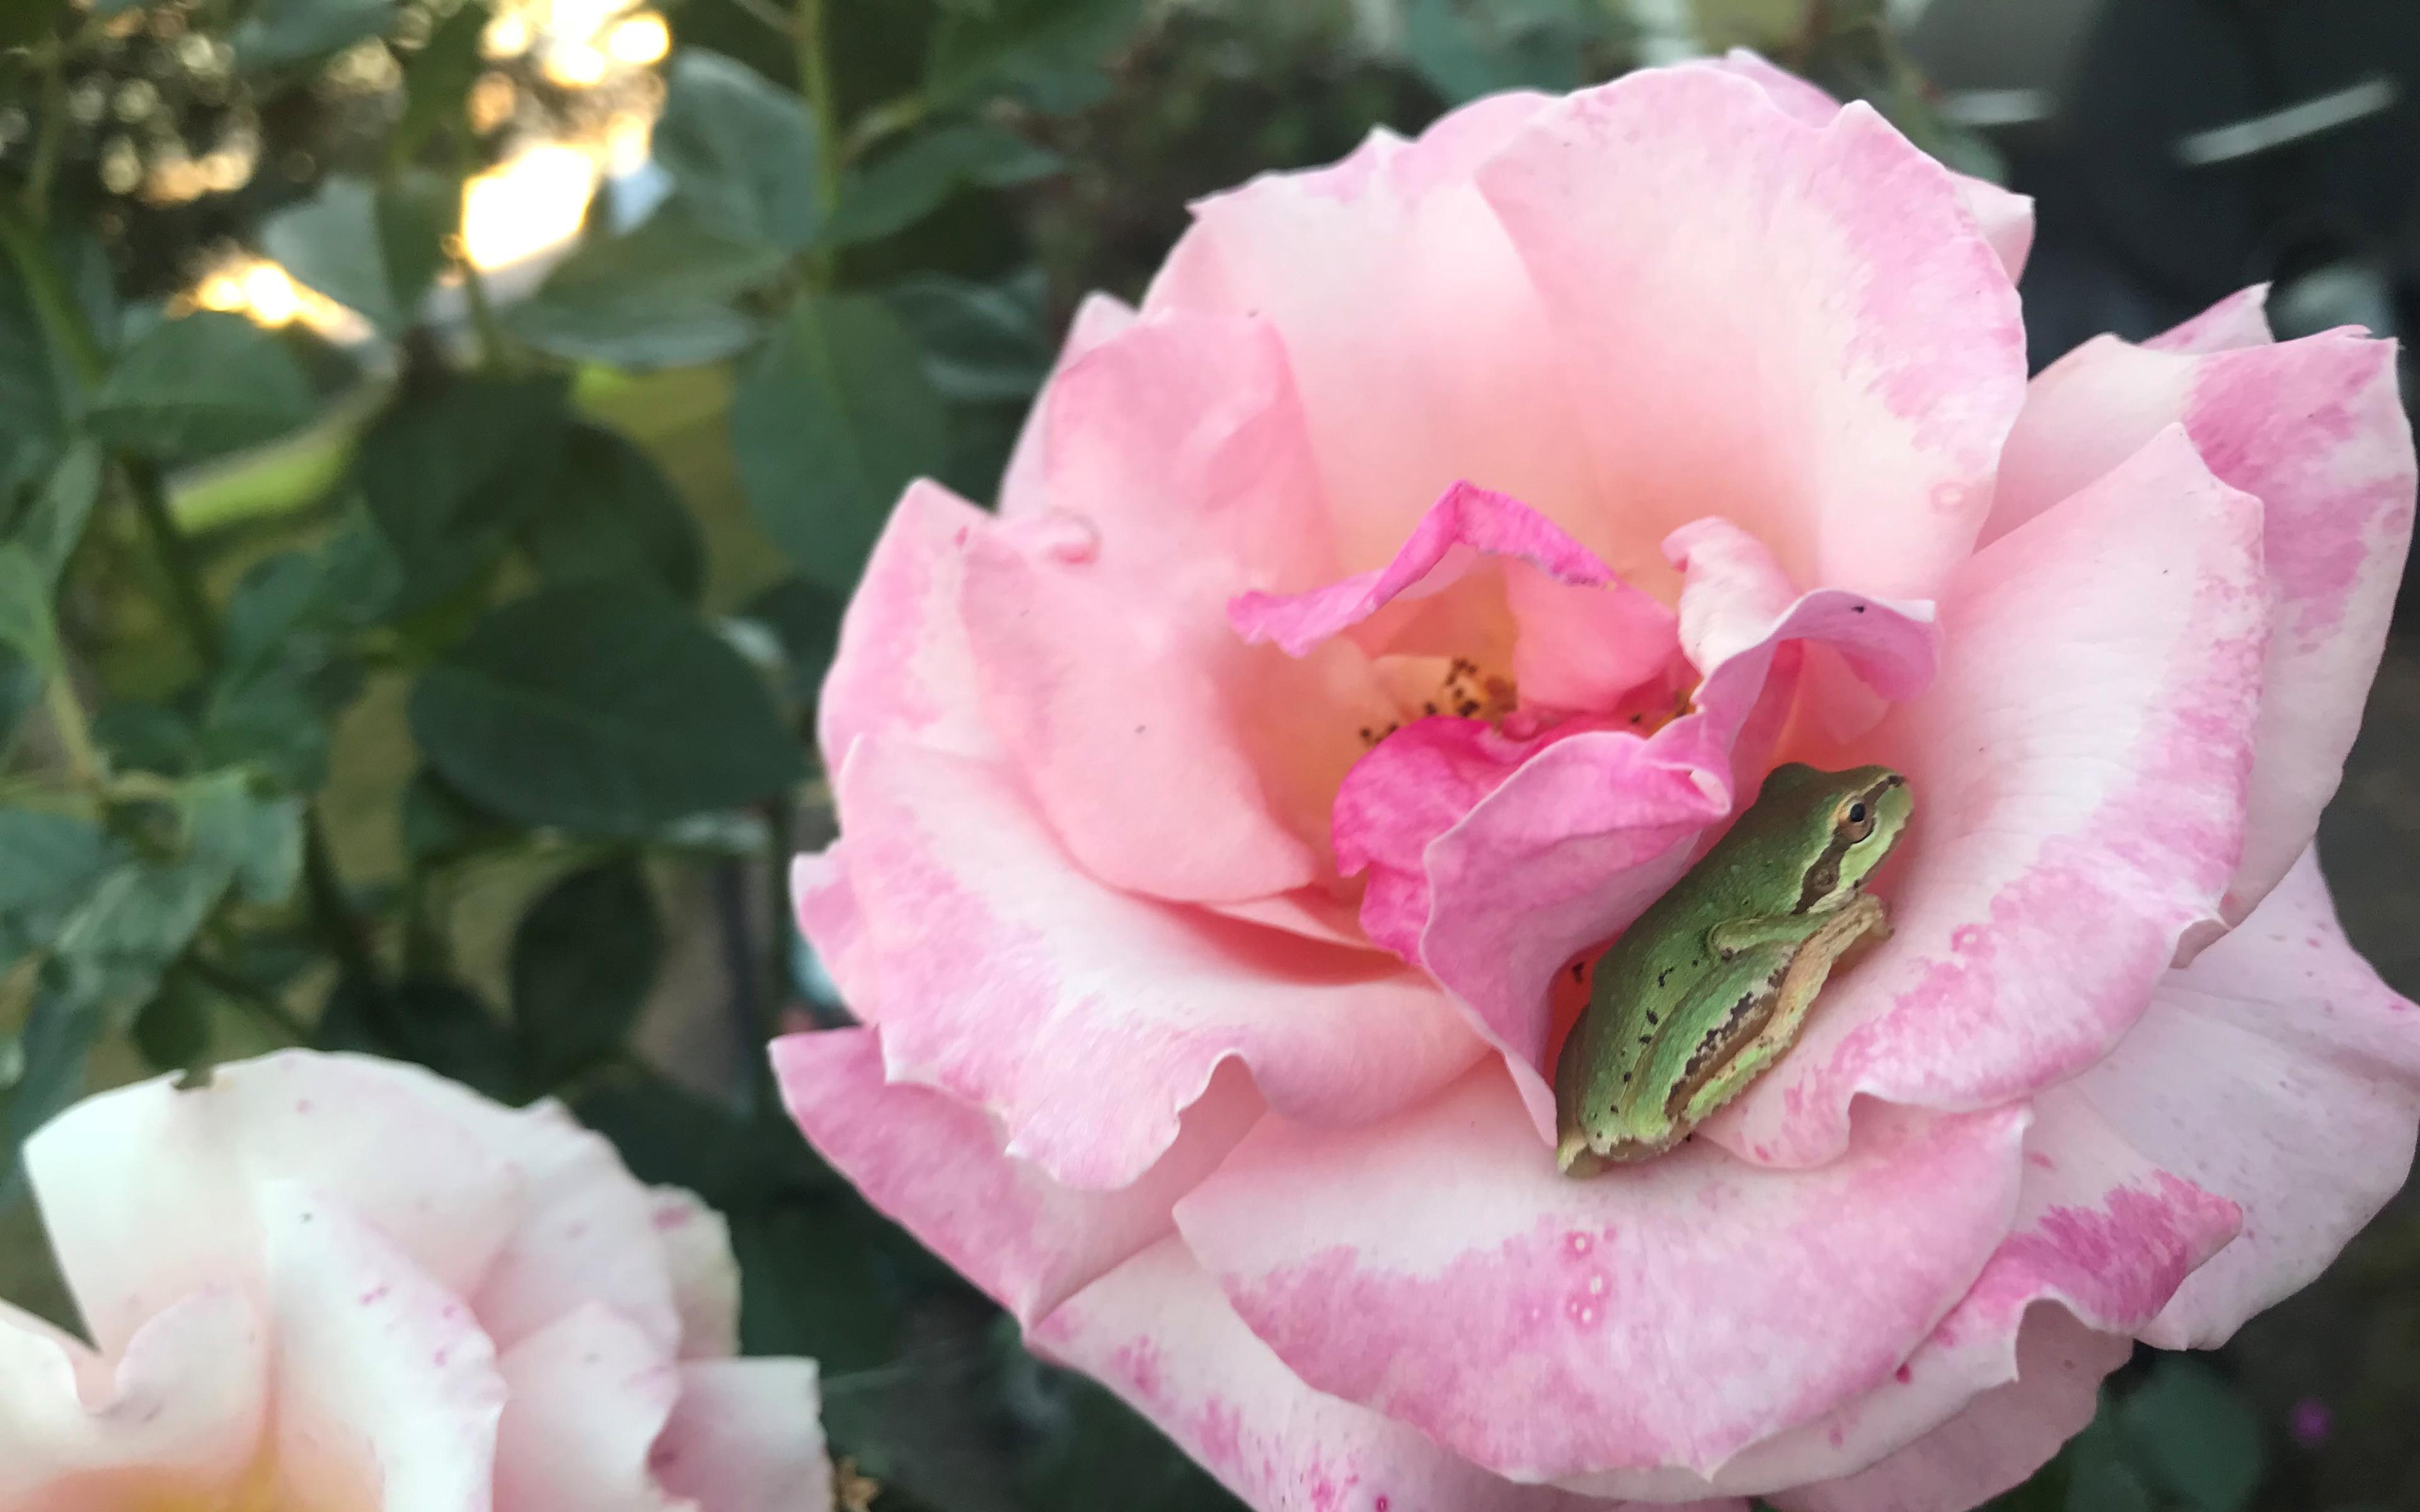 A frog finds a home in a rose at the Bansen farm.